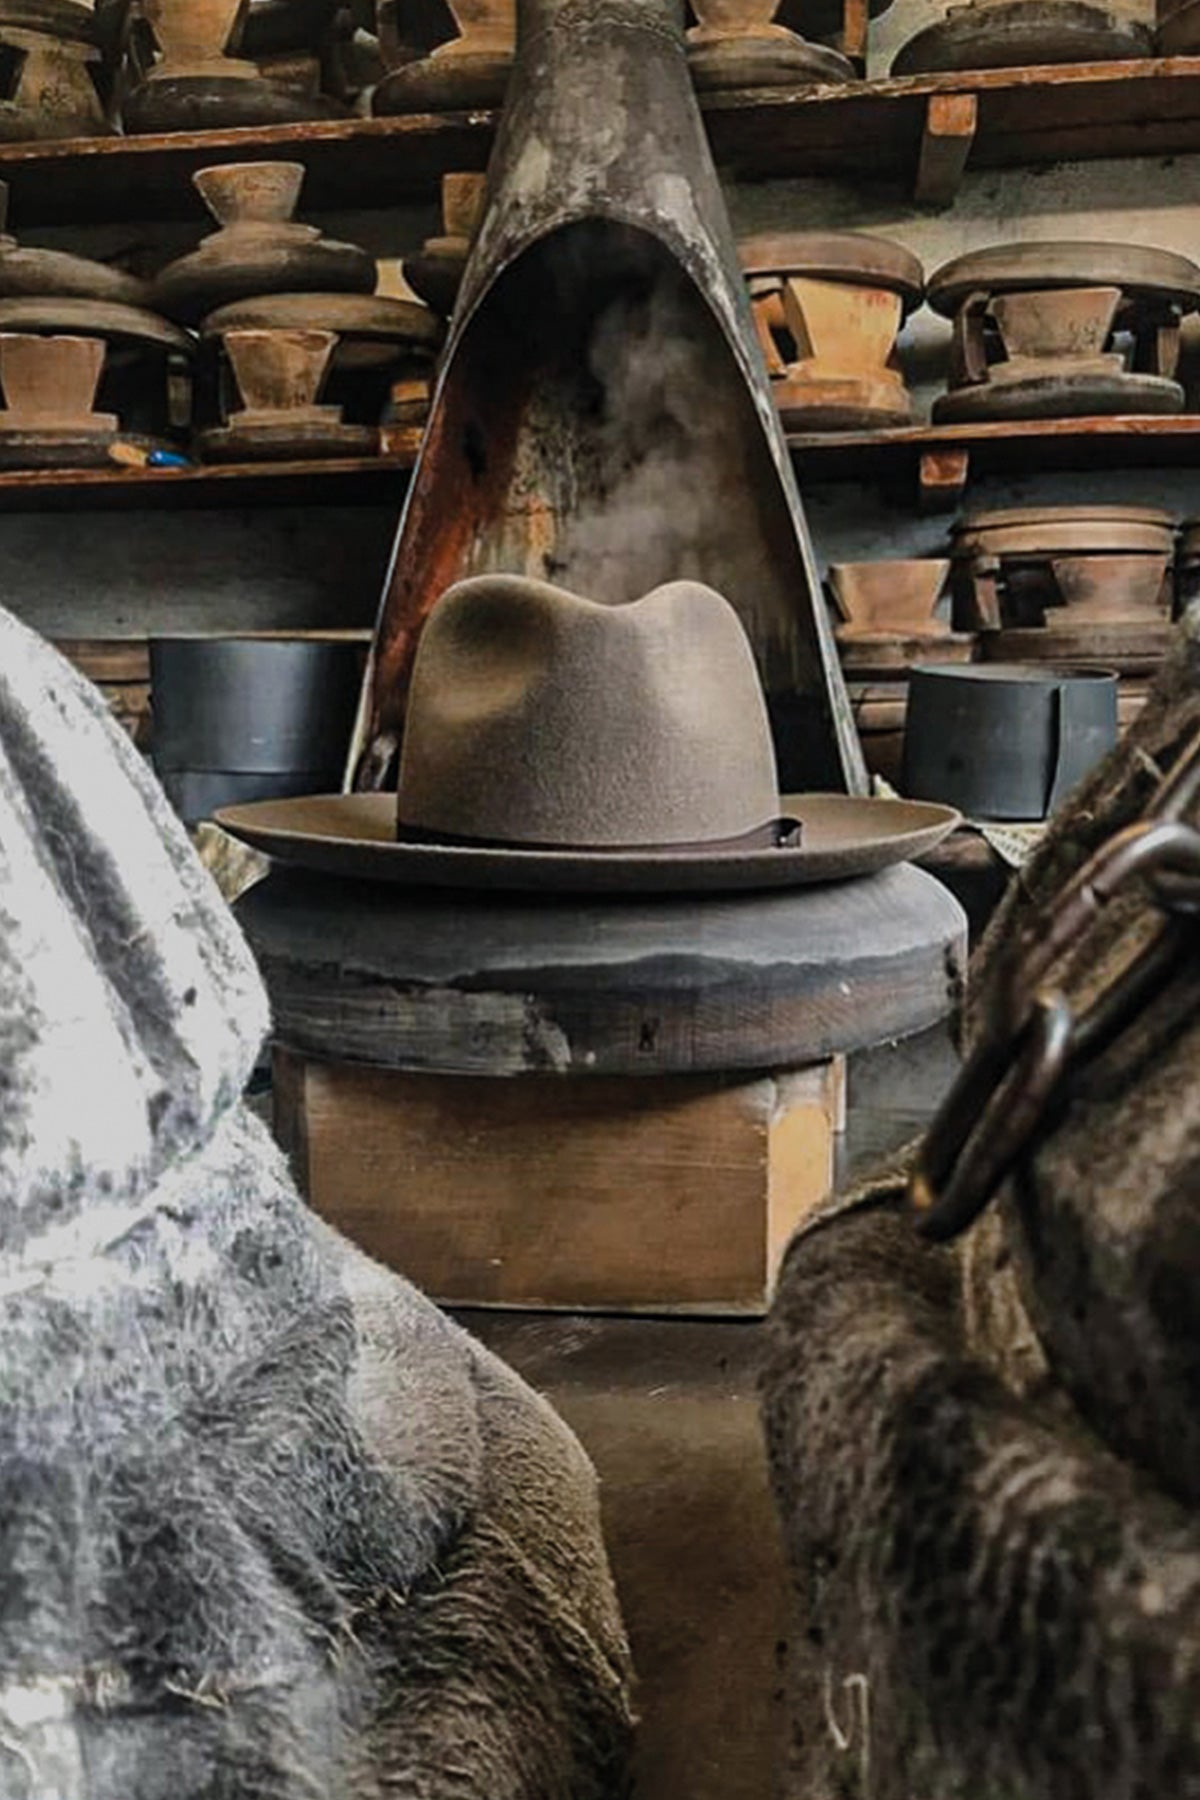 The Rugged Society - 50's Style Worker Western Hat - Handmade to order - Pre-orders only